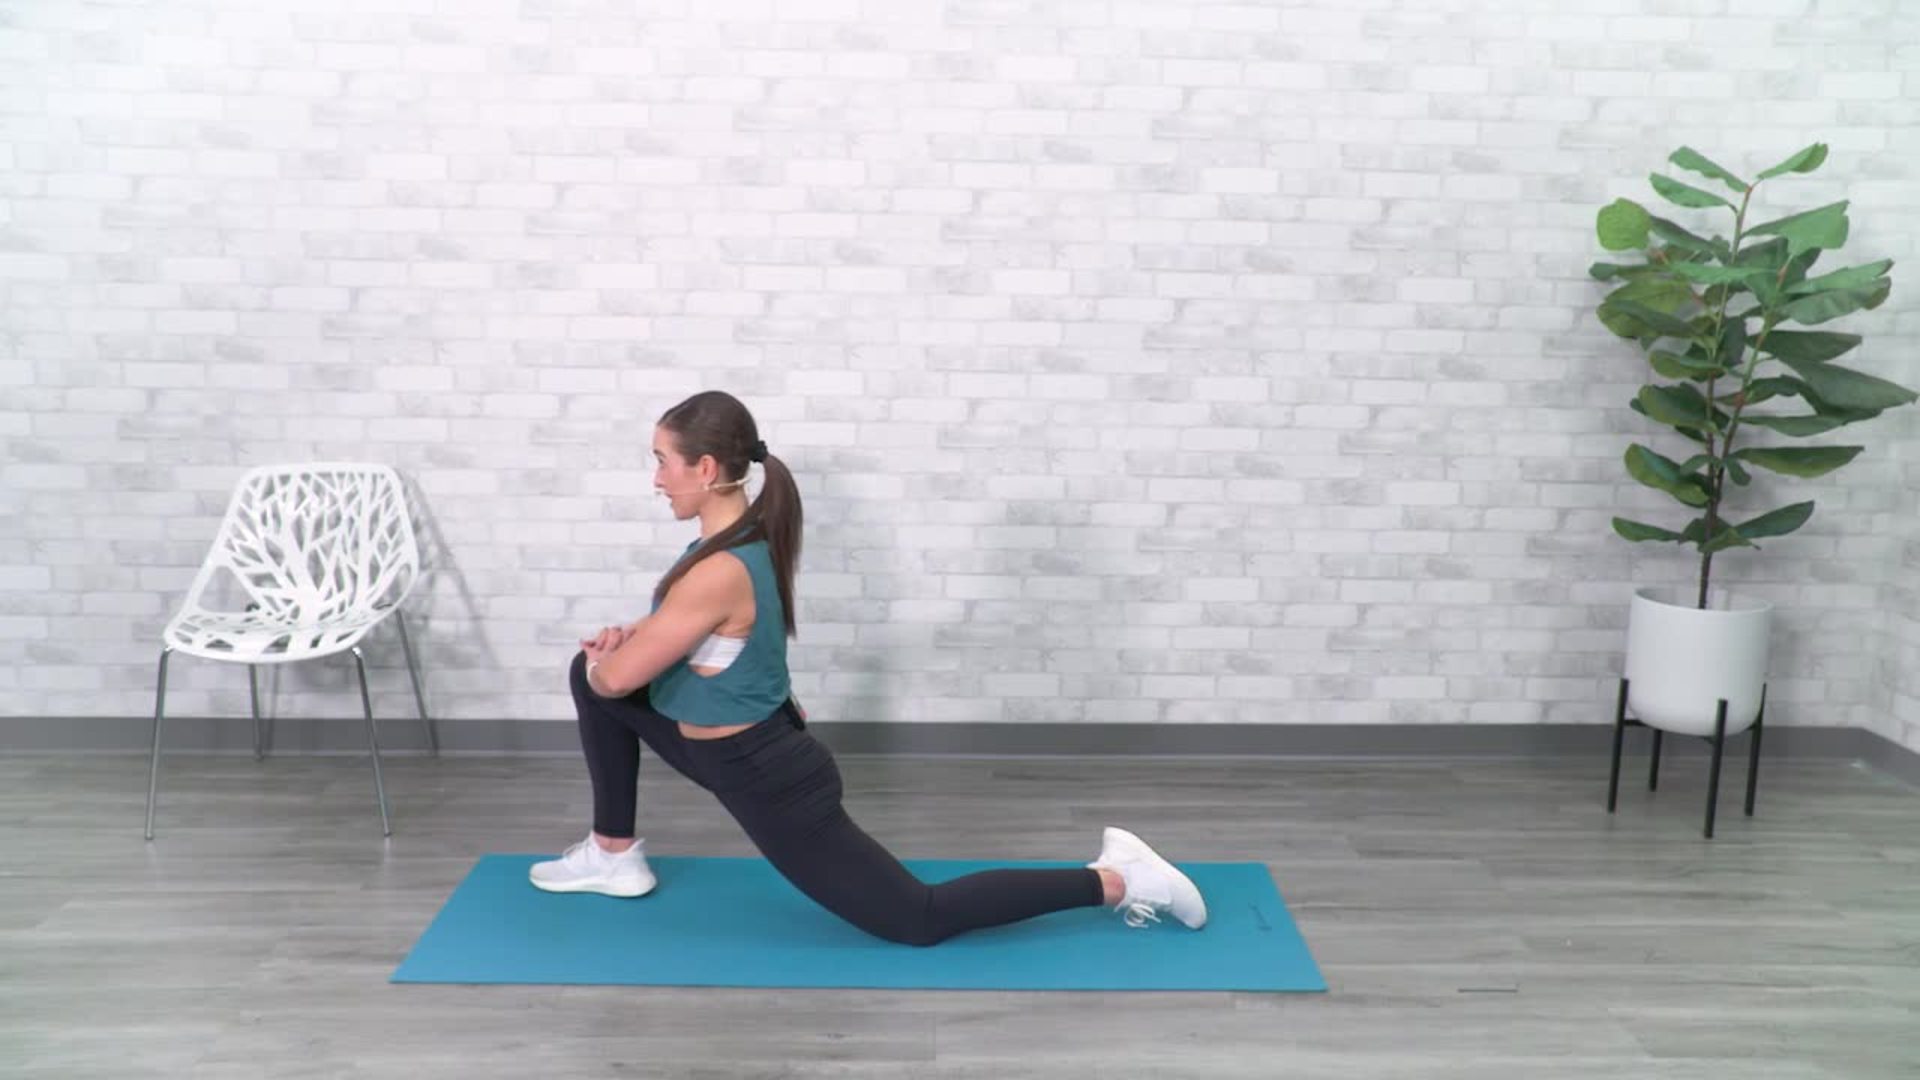 10-Minute Stretch and Flexibility 1 [Video]